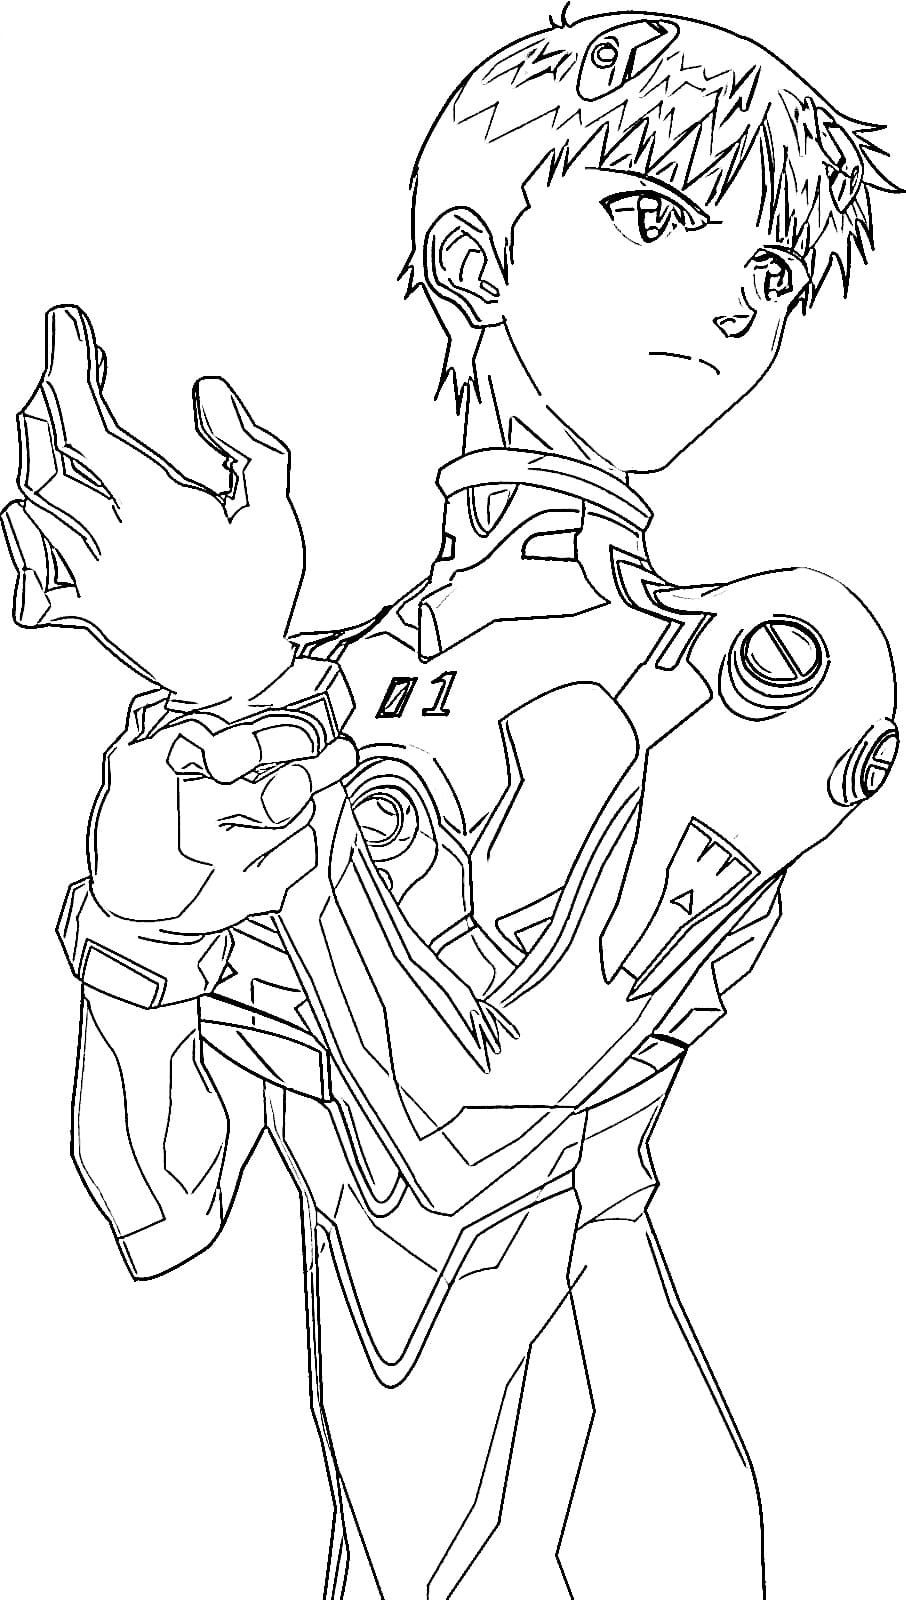 Evangelion Anime Coloring Pages